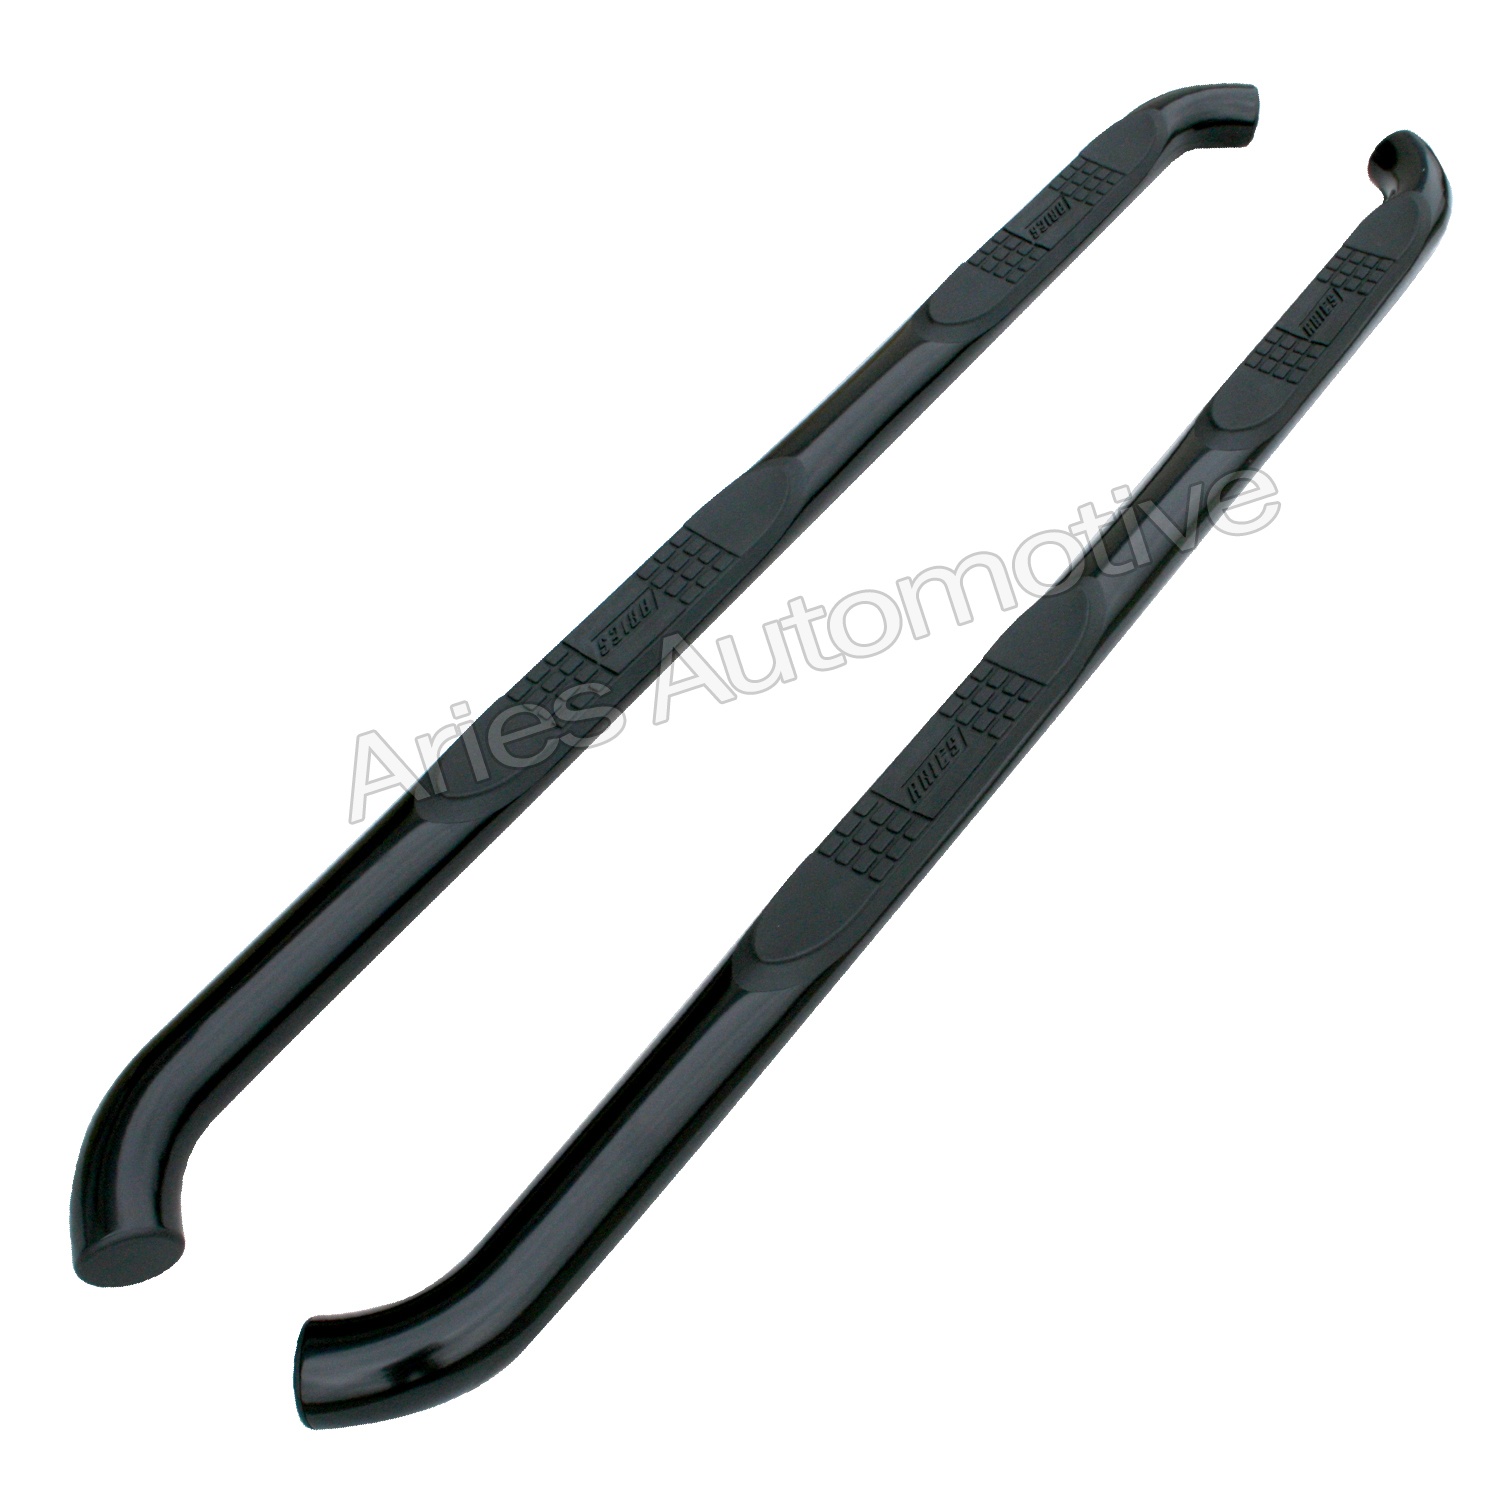 Aries Offroad Aries Offroad 200101 Side Bars; 3 in. Nerf Bar Fits 05-10 Sportage Tucson